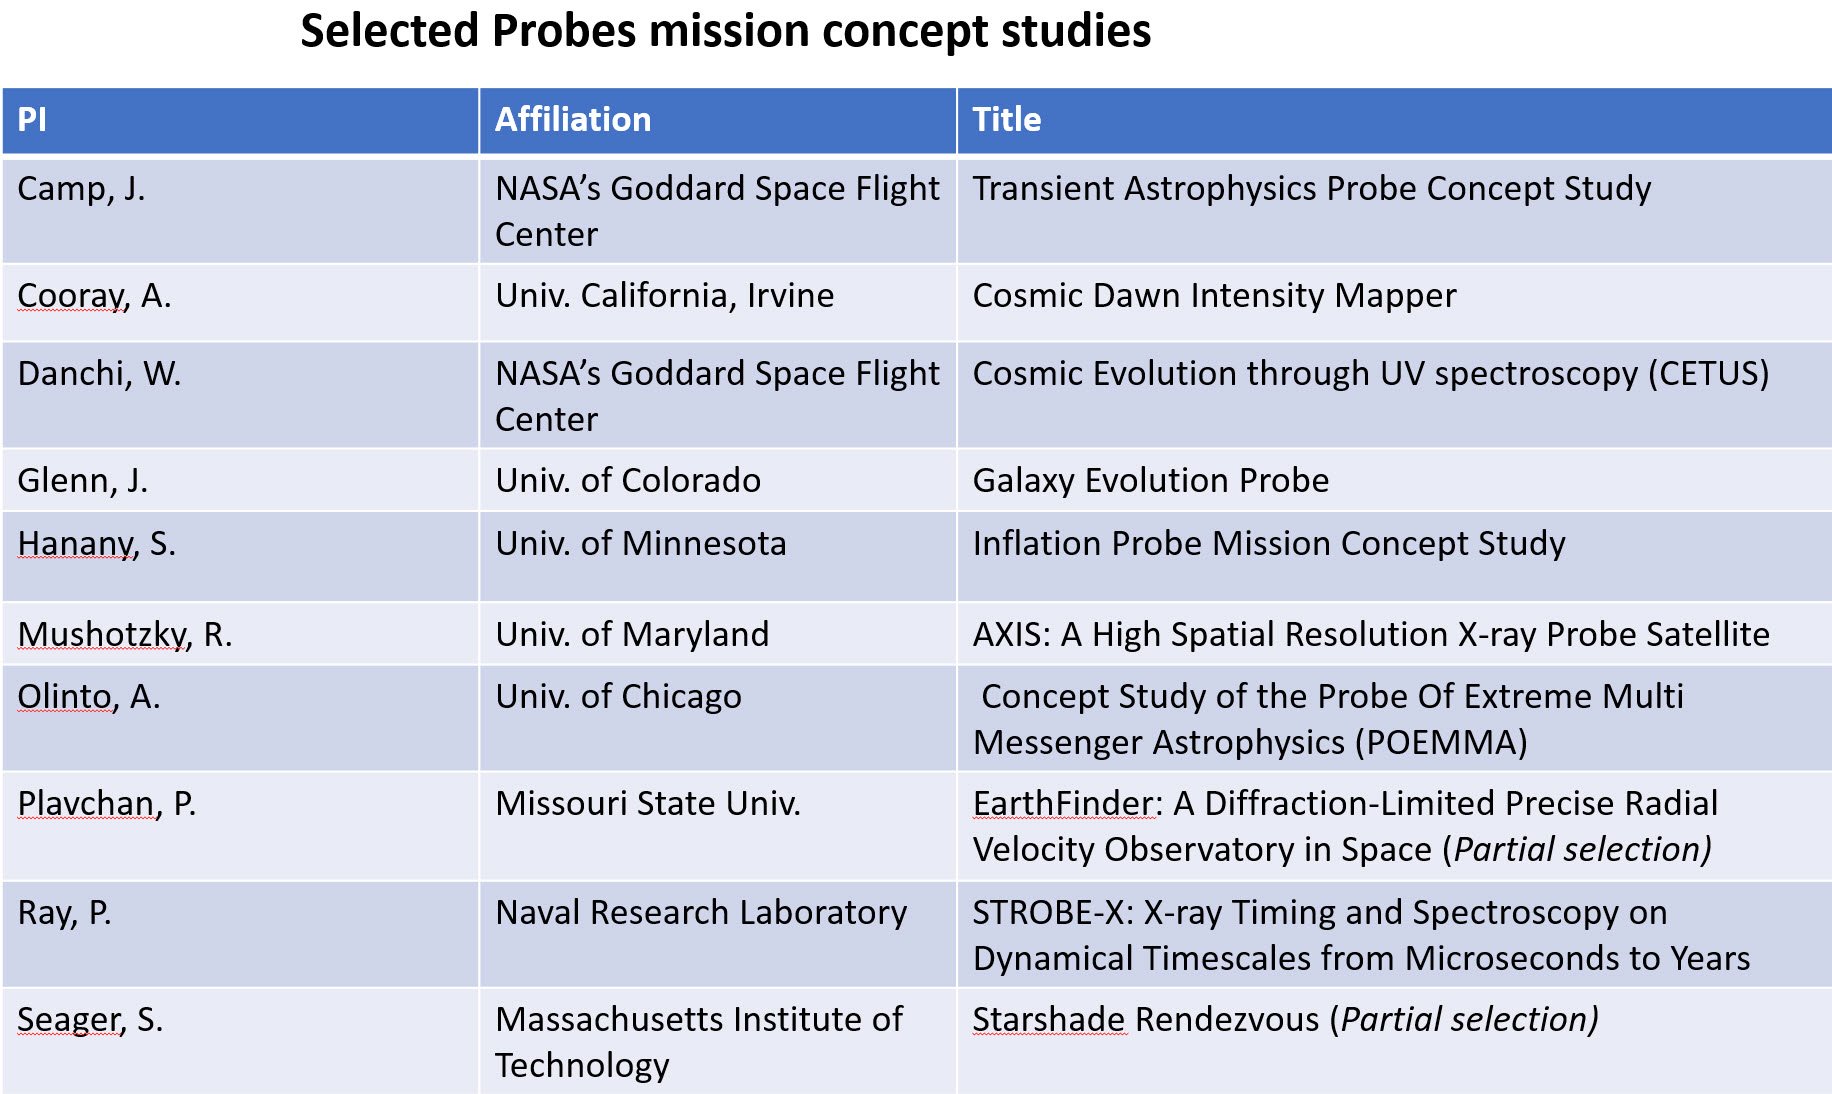 Selected Probe Mission Concept Studies